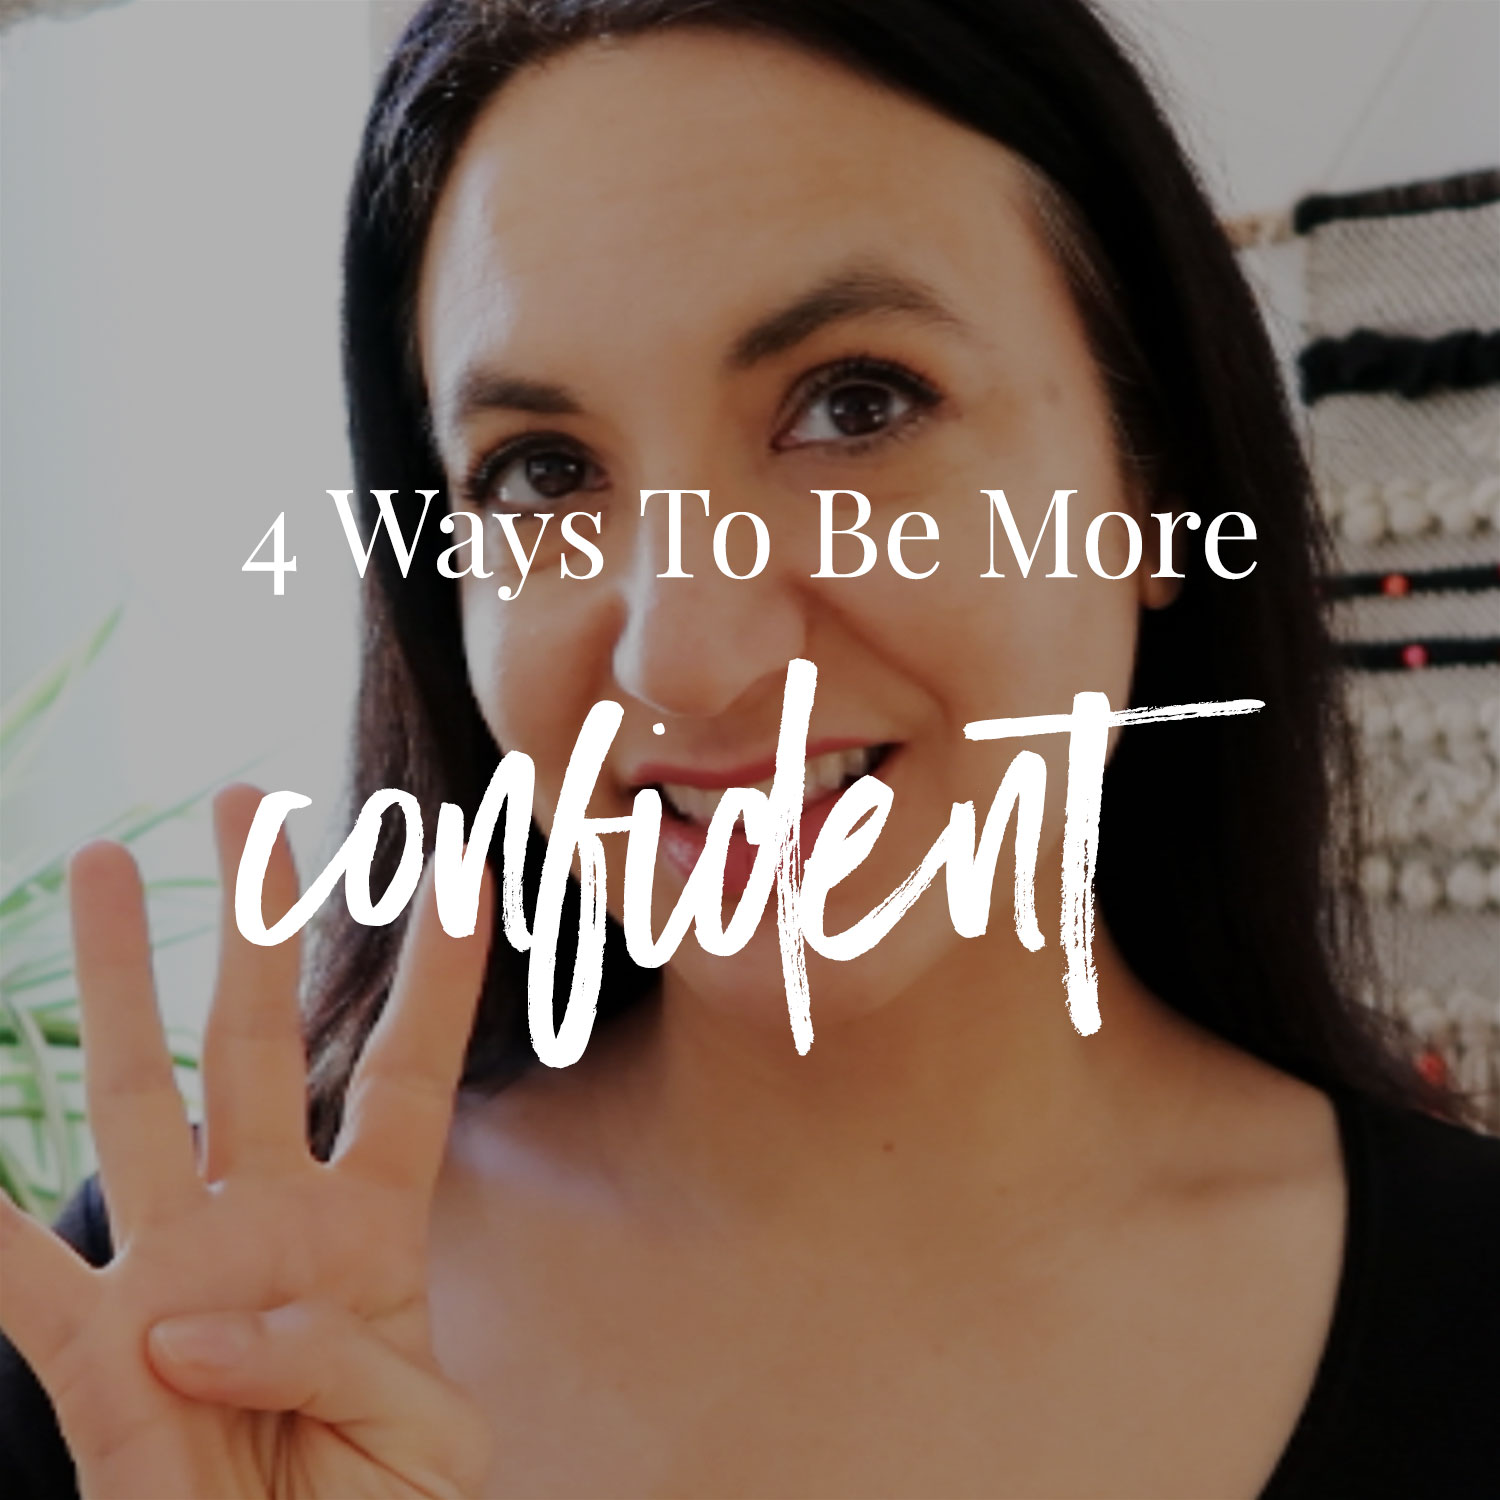 4 Ways To Be More Confident